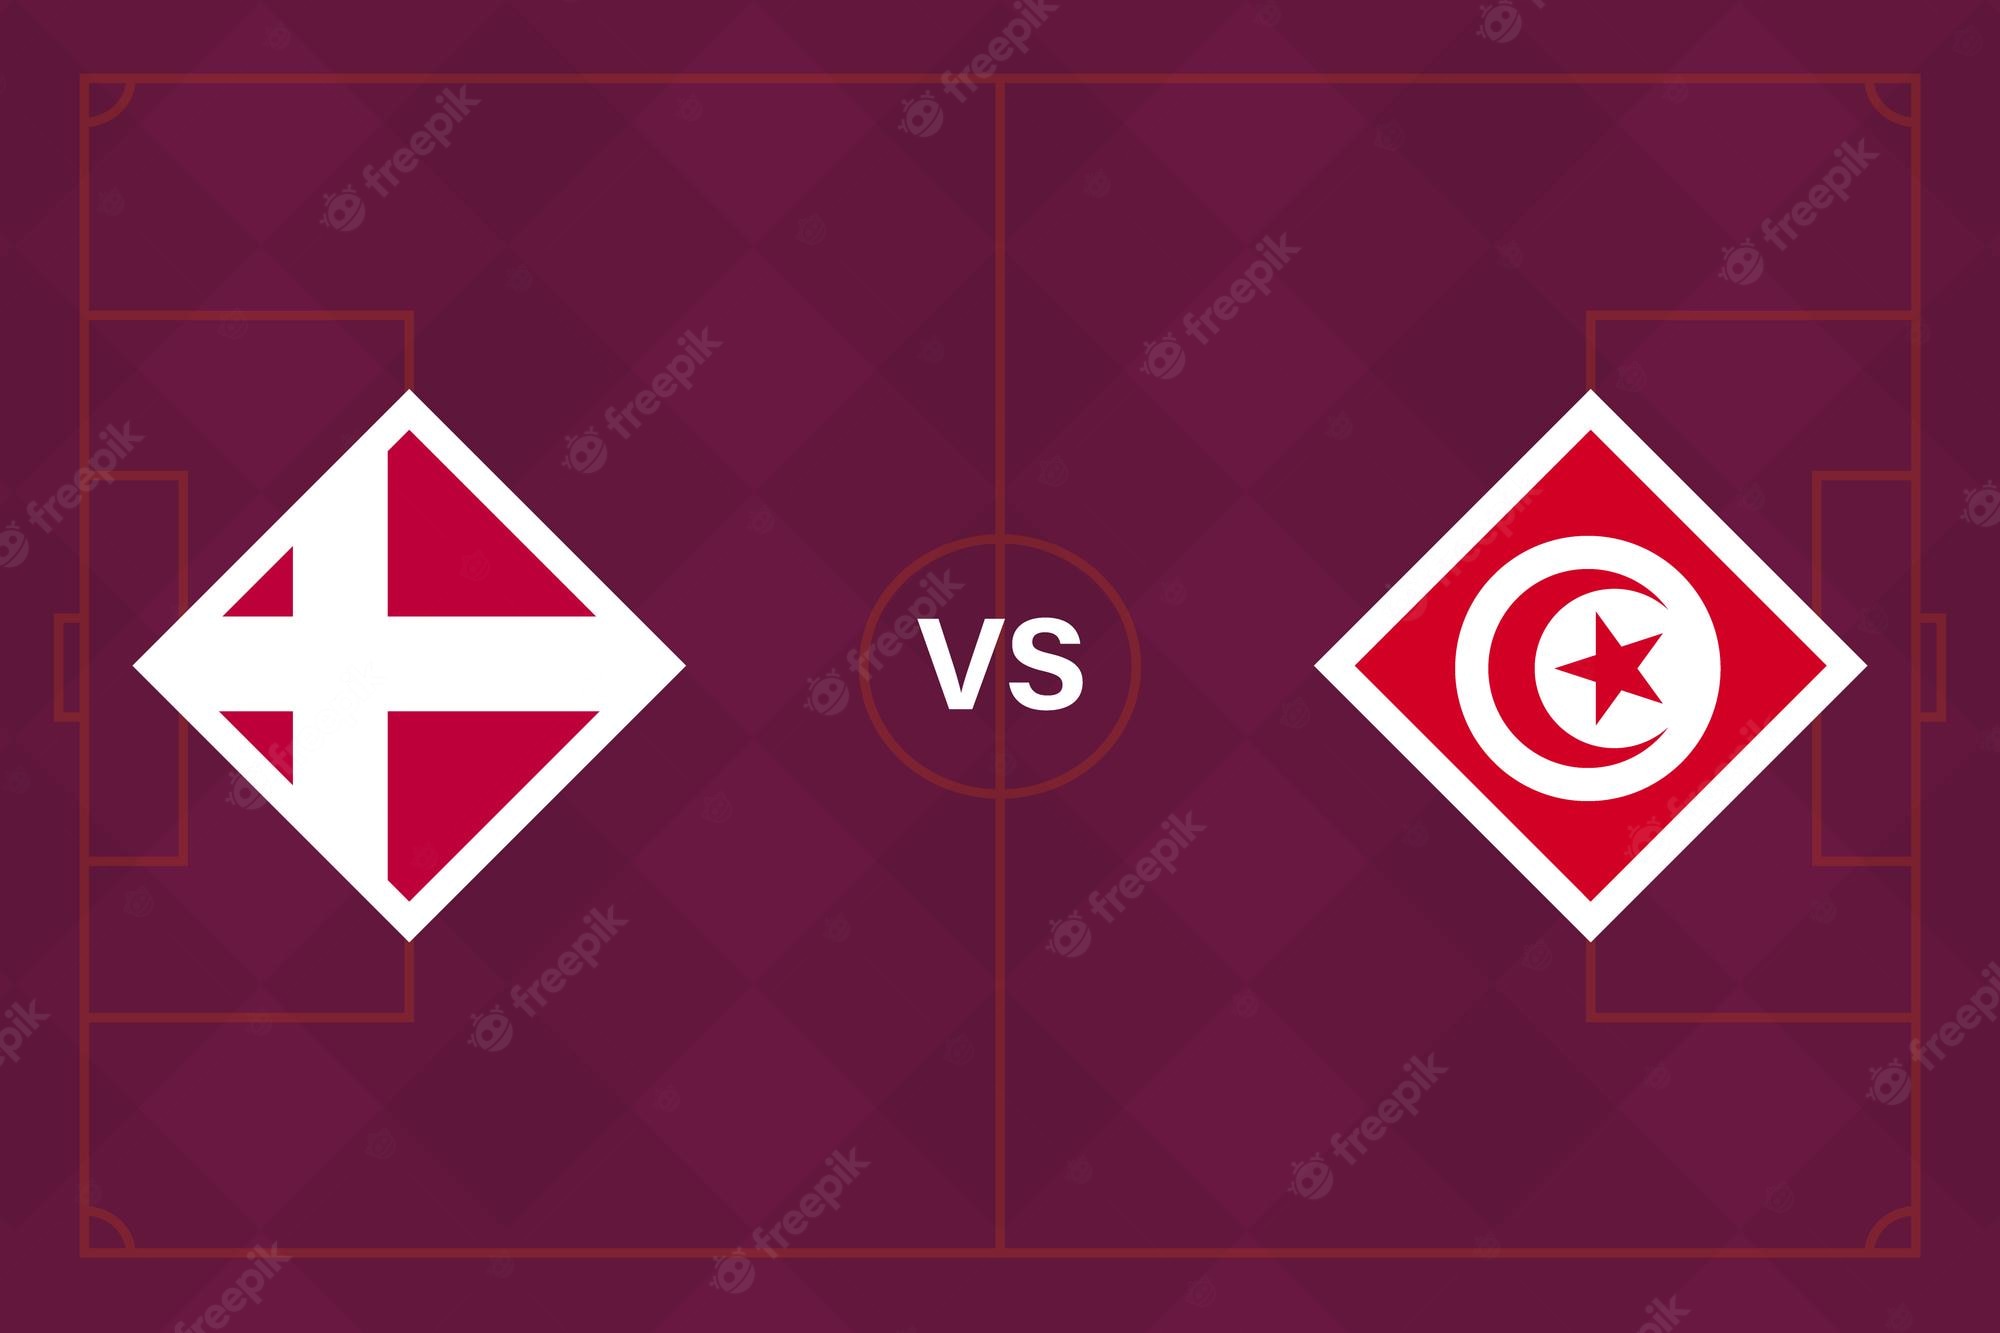 matches phase groupes danemark vs tunisie template 644416 651